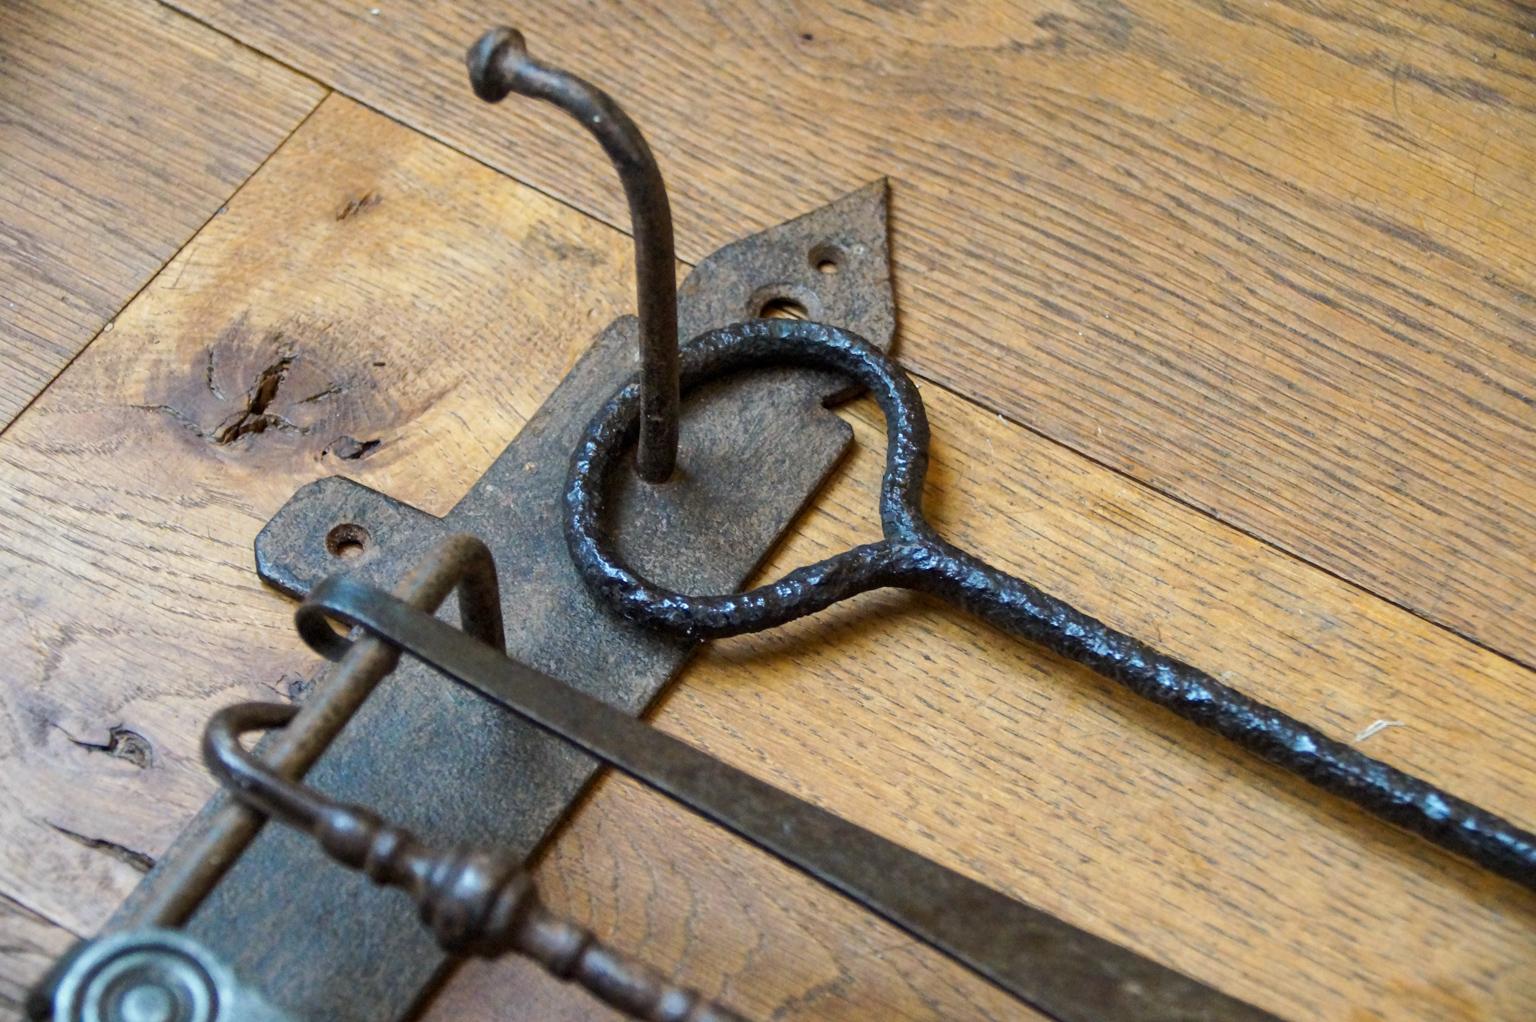 Forged Antique Dutch Fireplace Tool Set, Fire Tools, 18th-19th Century